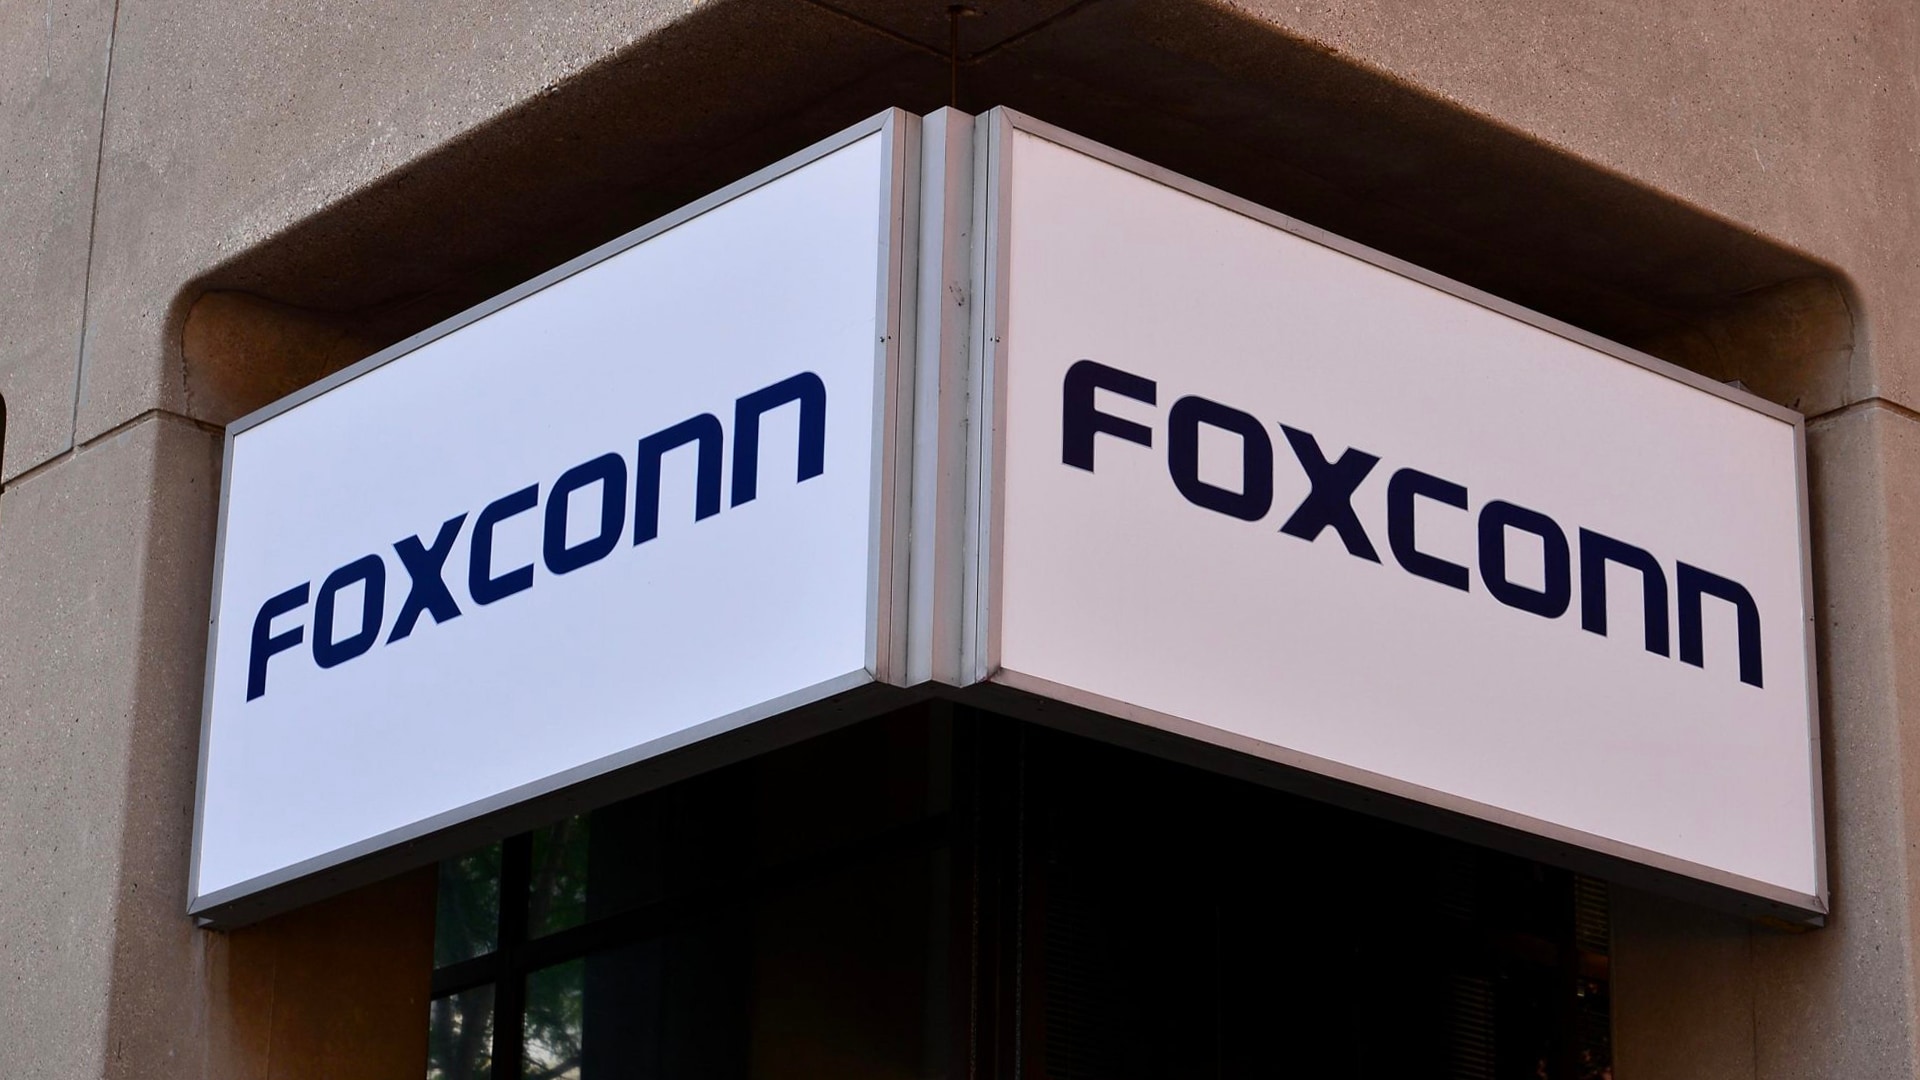 Apple supplier Foxconn takes stakeholders, investors by surprise, posts 11% profit in Q3